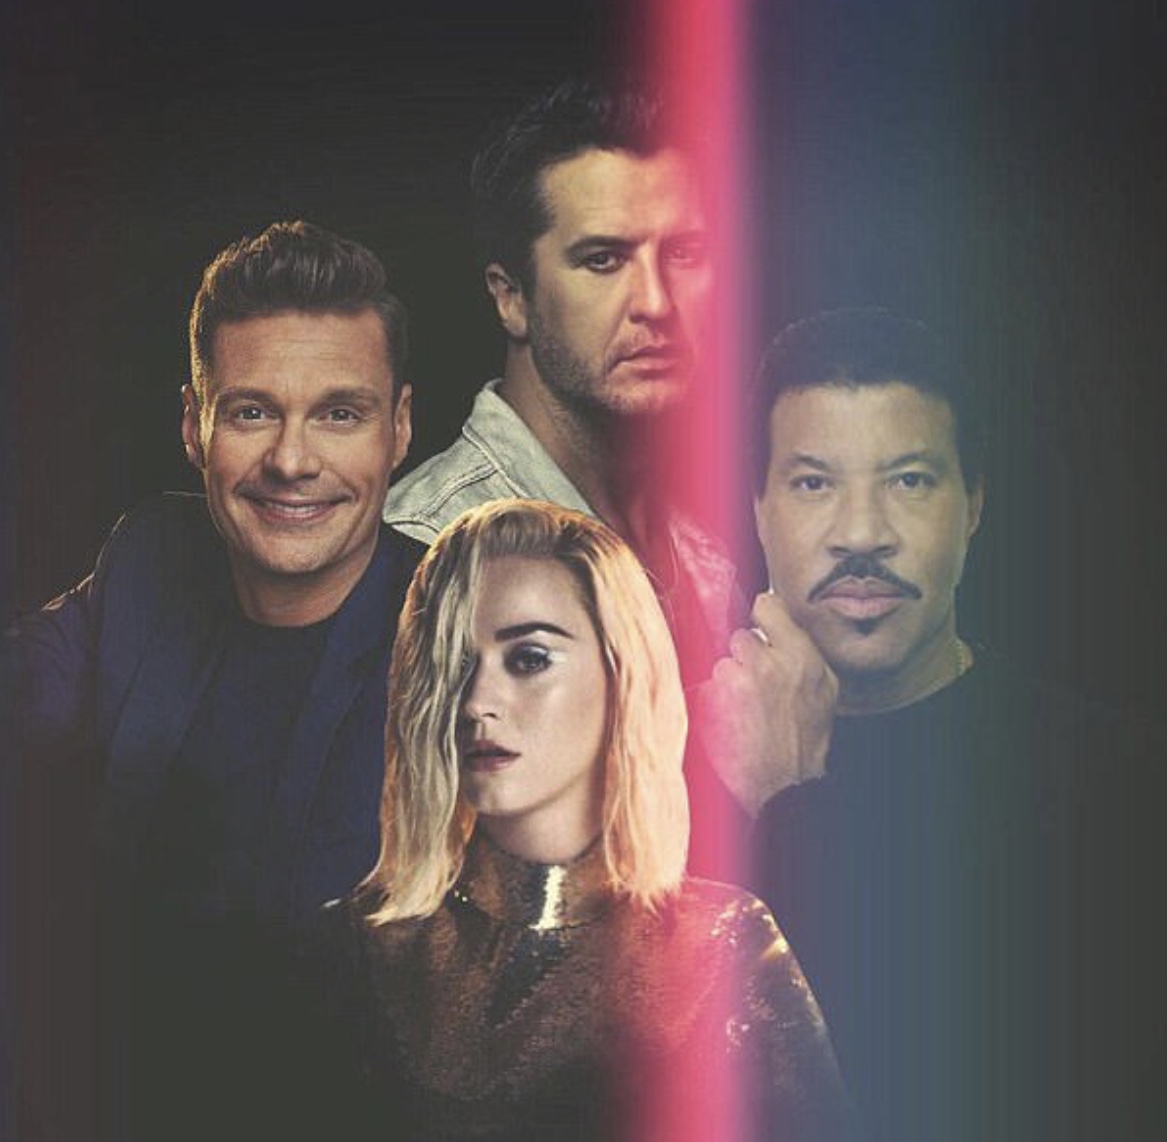 Will you be watching the new season of American Idol?